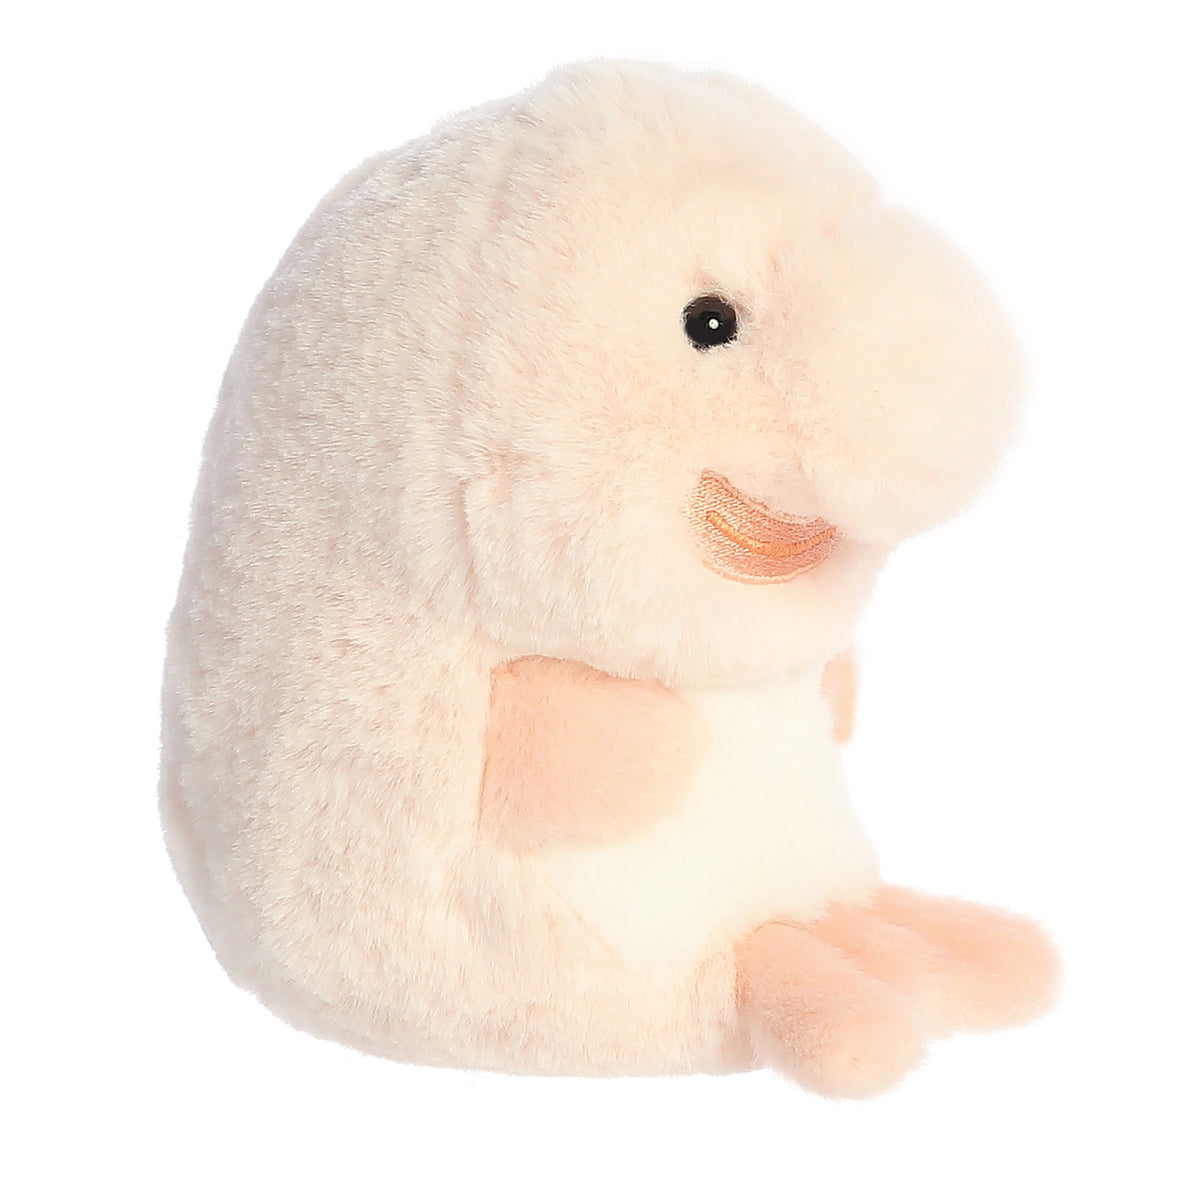 Pink Blobfish plush with a distinctive, friendly smile and white belly, representing a quirky and adorable underwater friend.